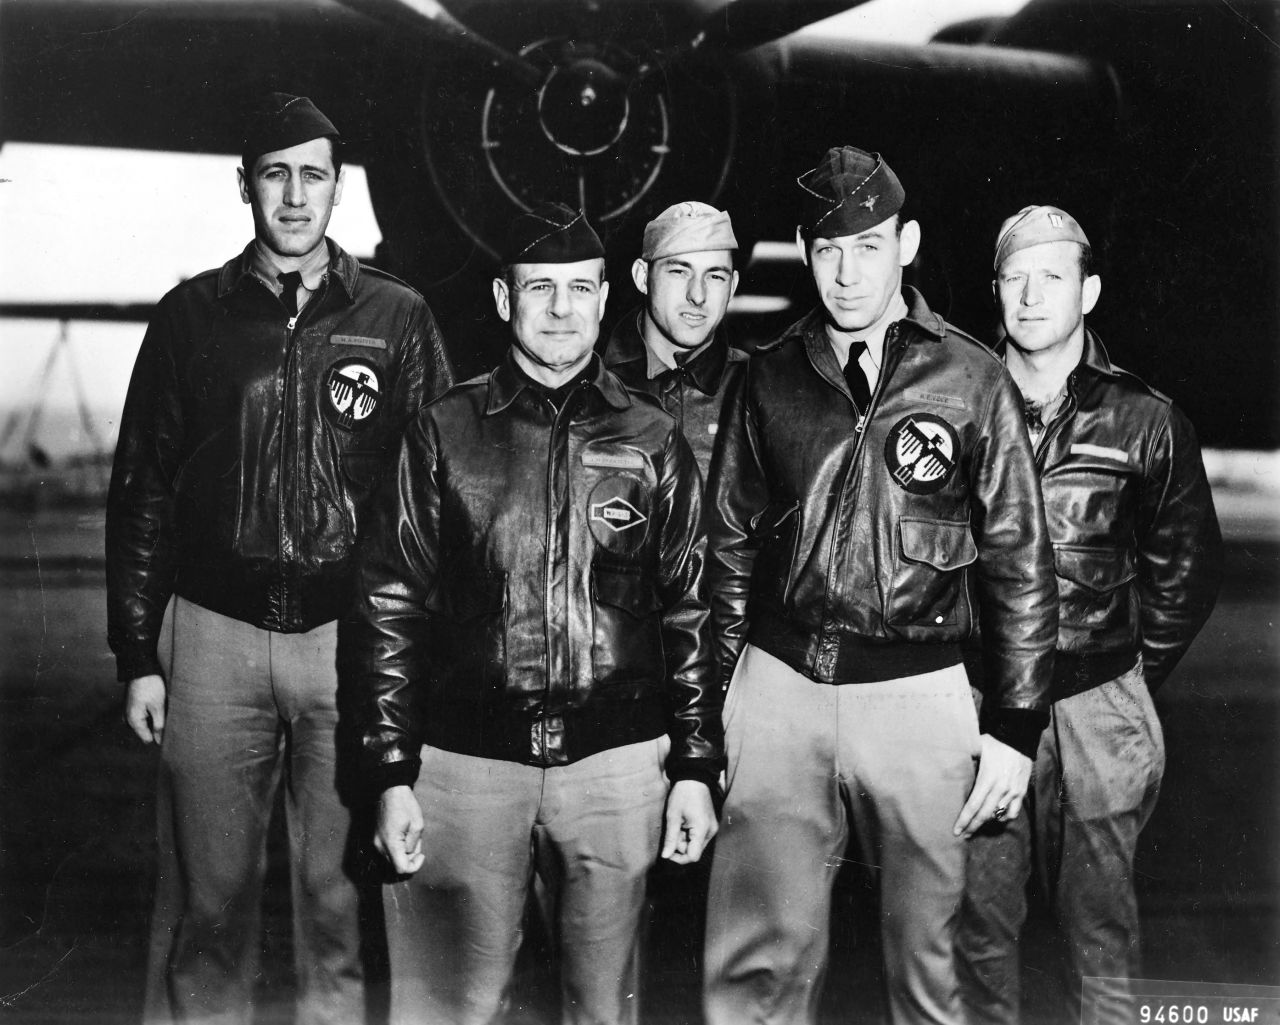 The crew of the lead aircraft included (from left): navigator Lt. Henry "Hank" Potter, pilot Lt. Col. James "Jimmy" Doolittle, bombardier Staff Sgt. Fred Braemer, co-pilot Lt. Richard "Dick" Cole and engineer/gunner Staff Sgt. Paul Leonard.